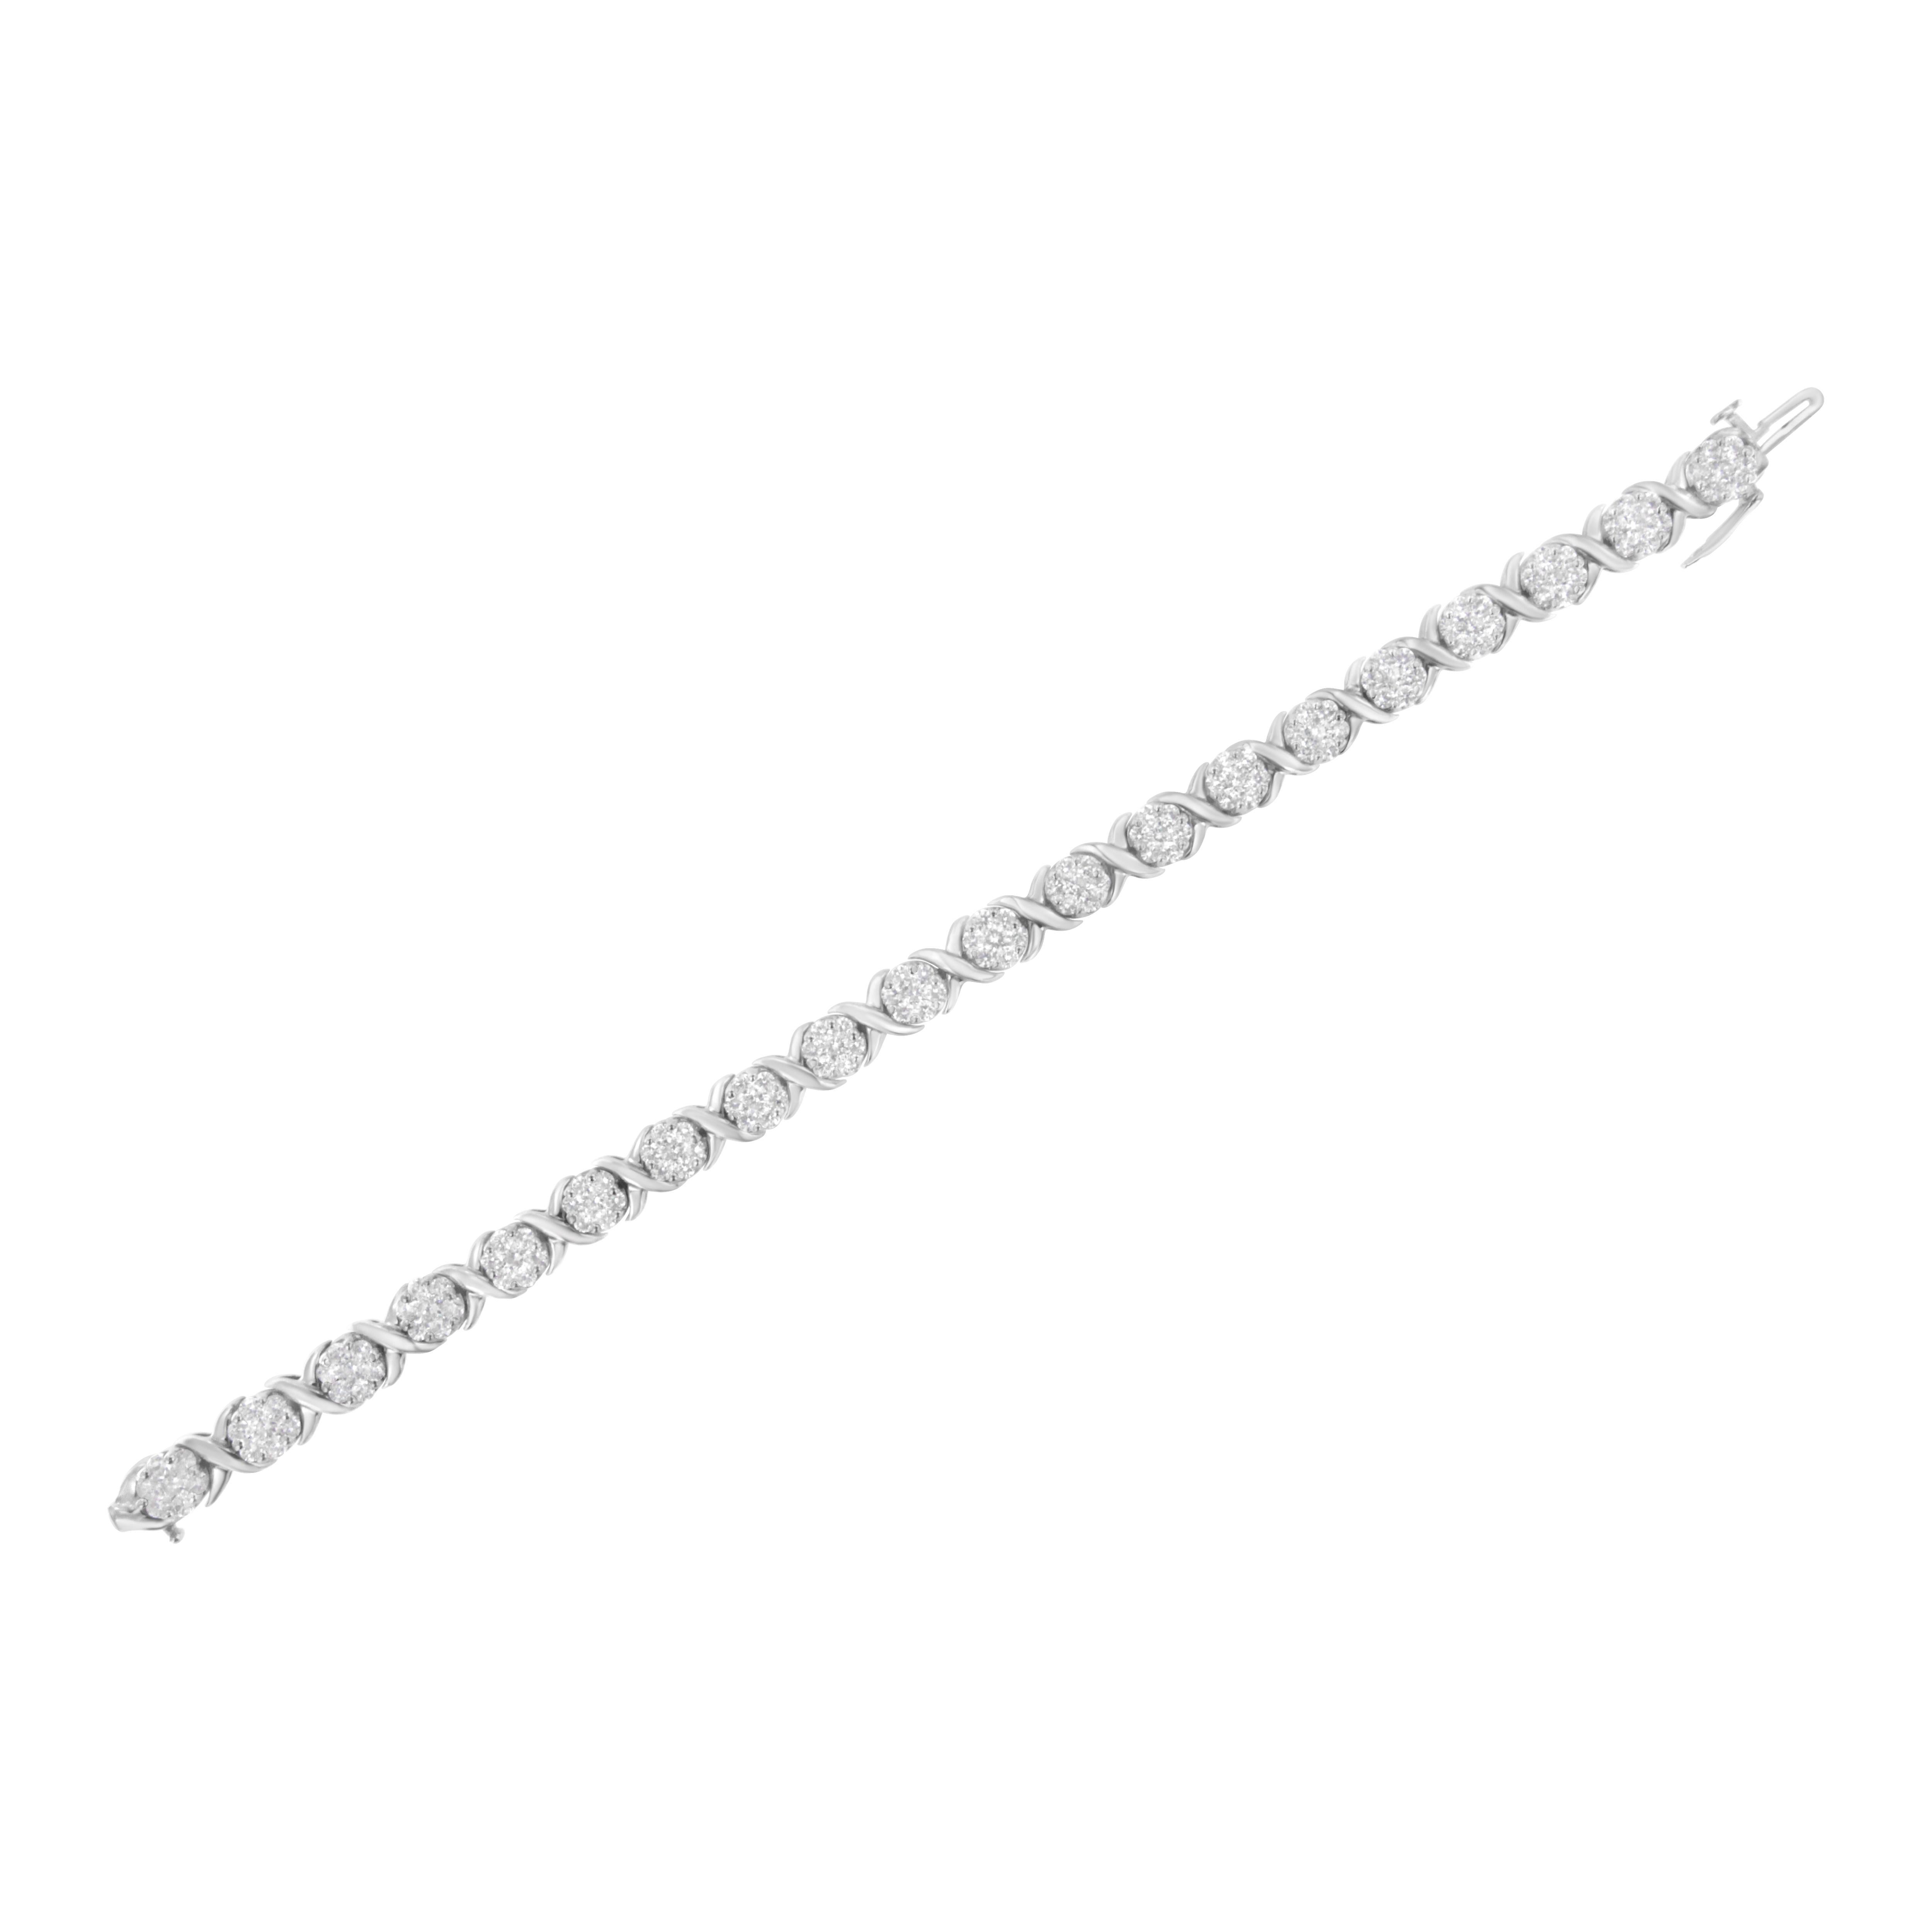 14K White Gold 7.0 Carat Geometric Pattern Diamond Link Bracelet In New Condition For Sale In New York, NY